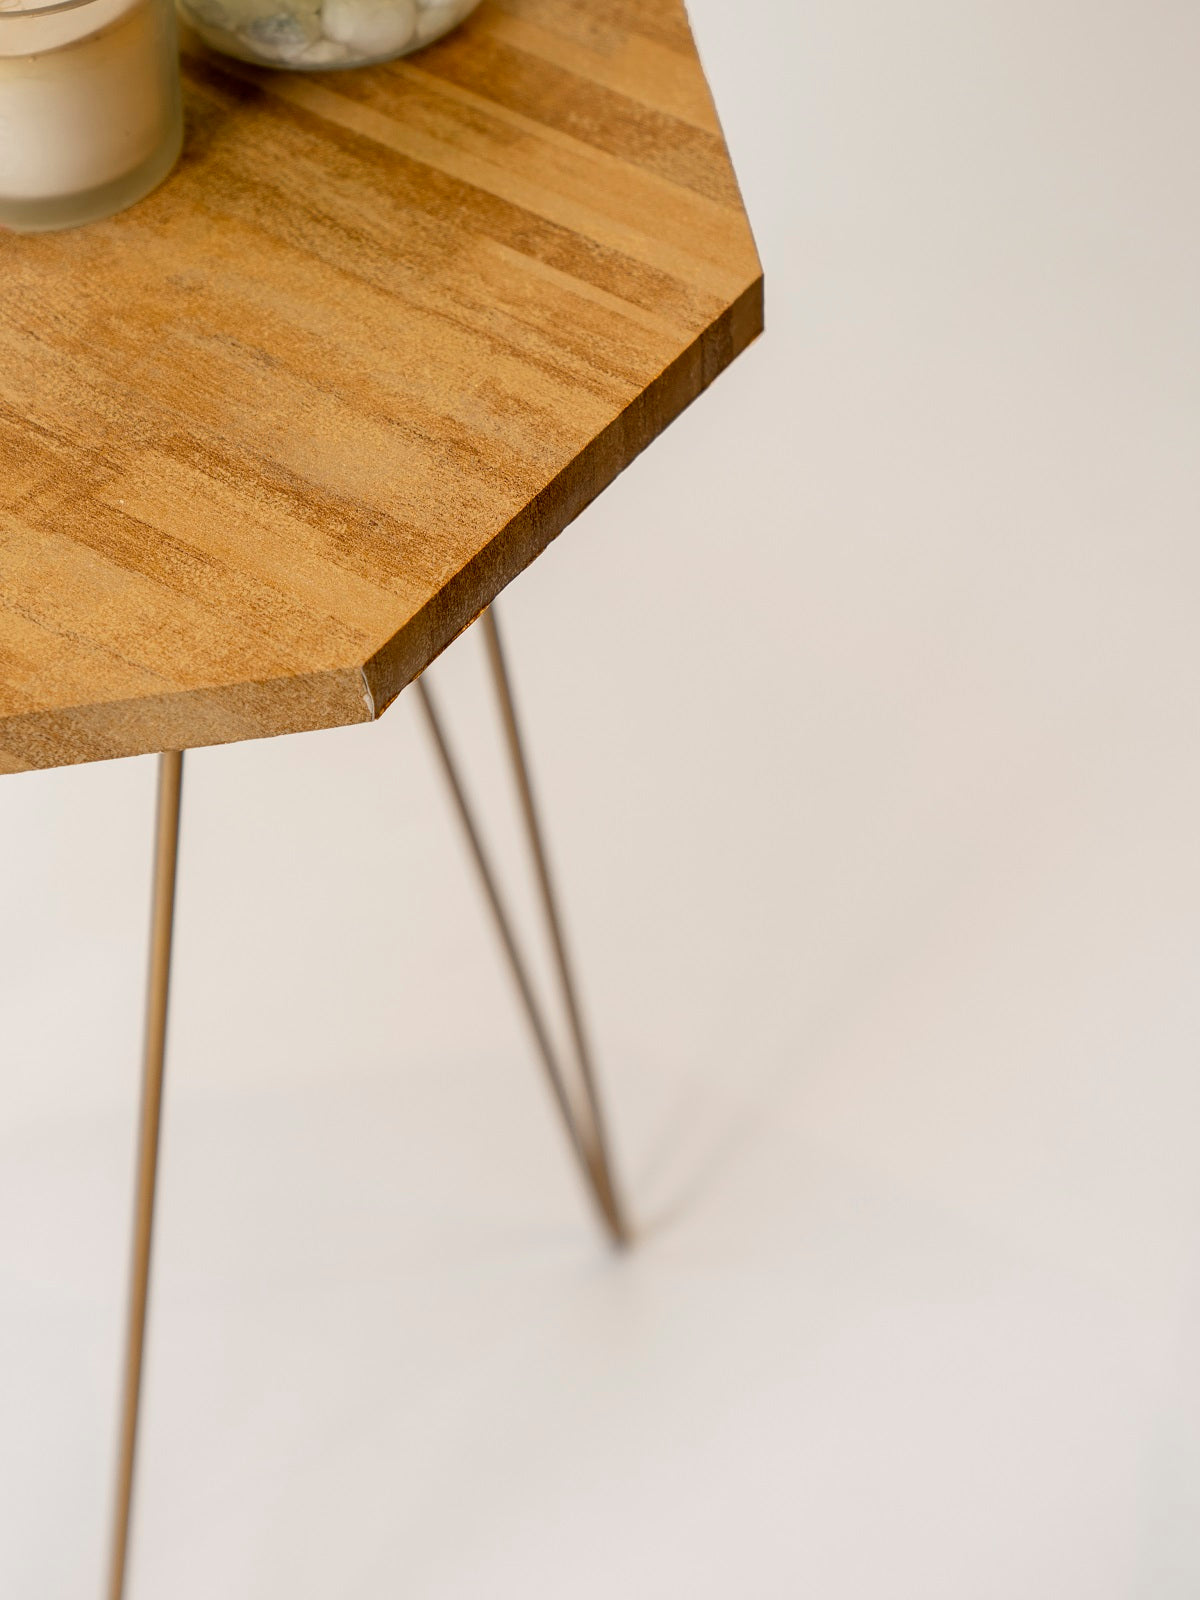 Gold Stacks Octagon Nesting Tables with Hairpin Legs, Side Tables, Wooden Tables, Living Room Decor by A Tiny Mistake